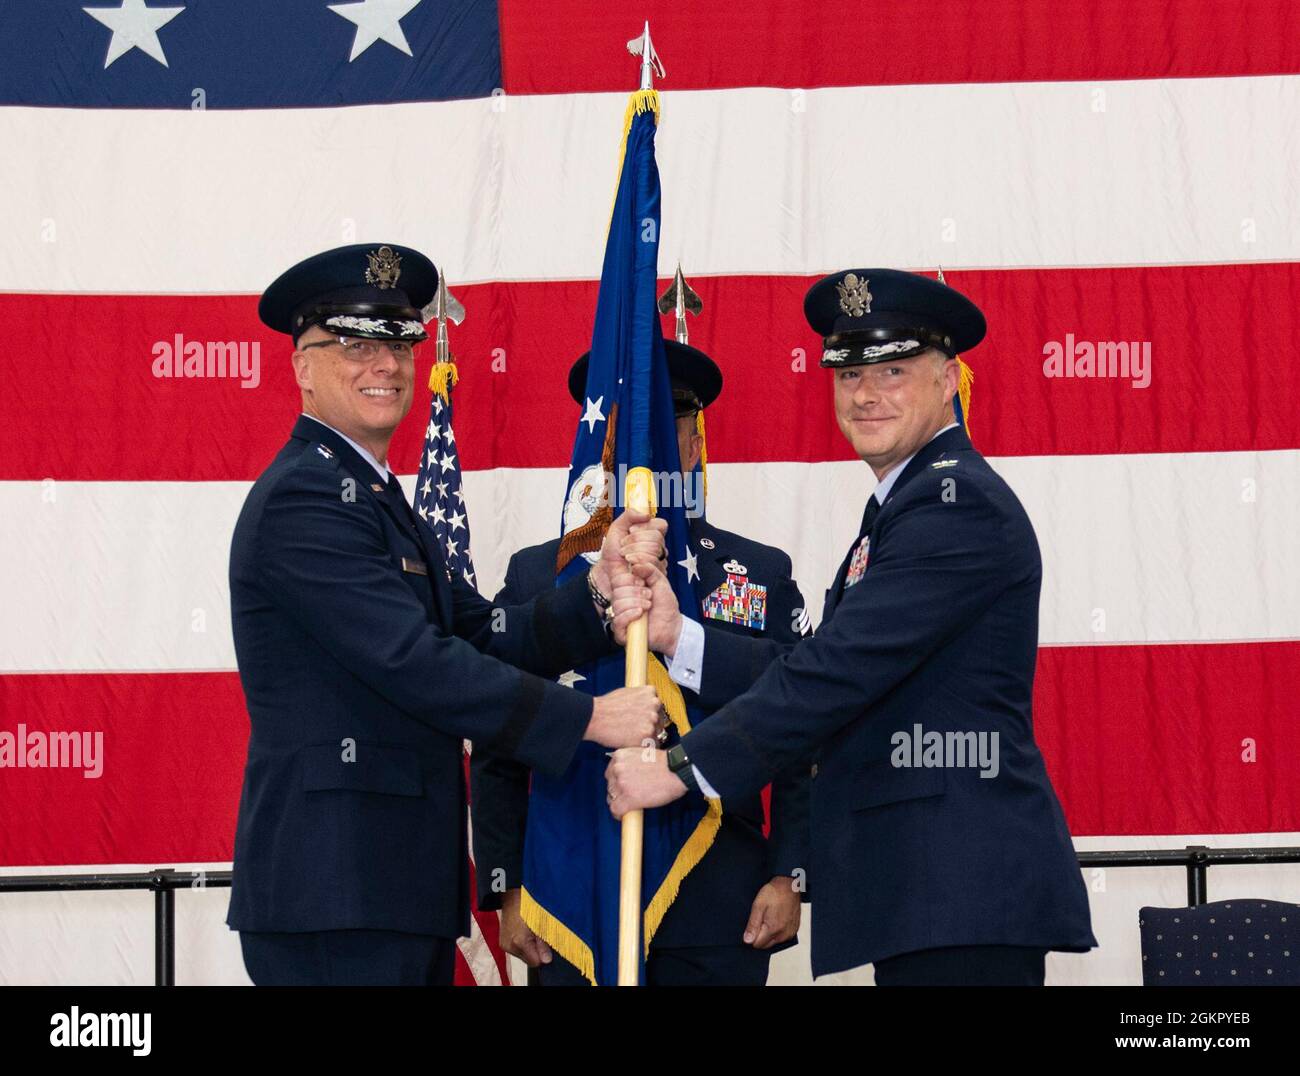 U.S. Air Force Maj. Gen. Mark Weatherington, Eighth Air Force and Joint-Global Strike Operations Center commander, passes the unit flag to Col. Daniel Diehl, in-coming 509th Bomb Wing commander, during the 509th BW change of command ceremony, Whiteman Air Force Base, Missouri, June 16, 2021. Diehl transitioned to Whiteman AFB from Dyess AFB, Texas, where he commanded the 7th Operations Group -- Air Force Global Strike Command’s largest B-1 bomb group. At Whiteman, Diehl will be responsible for the combat readiness of the Air Force’s only B-2 Spirit wing and supporting installation functions. Stock Photo